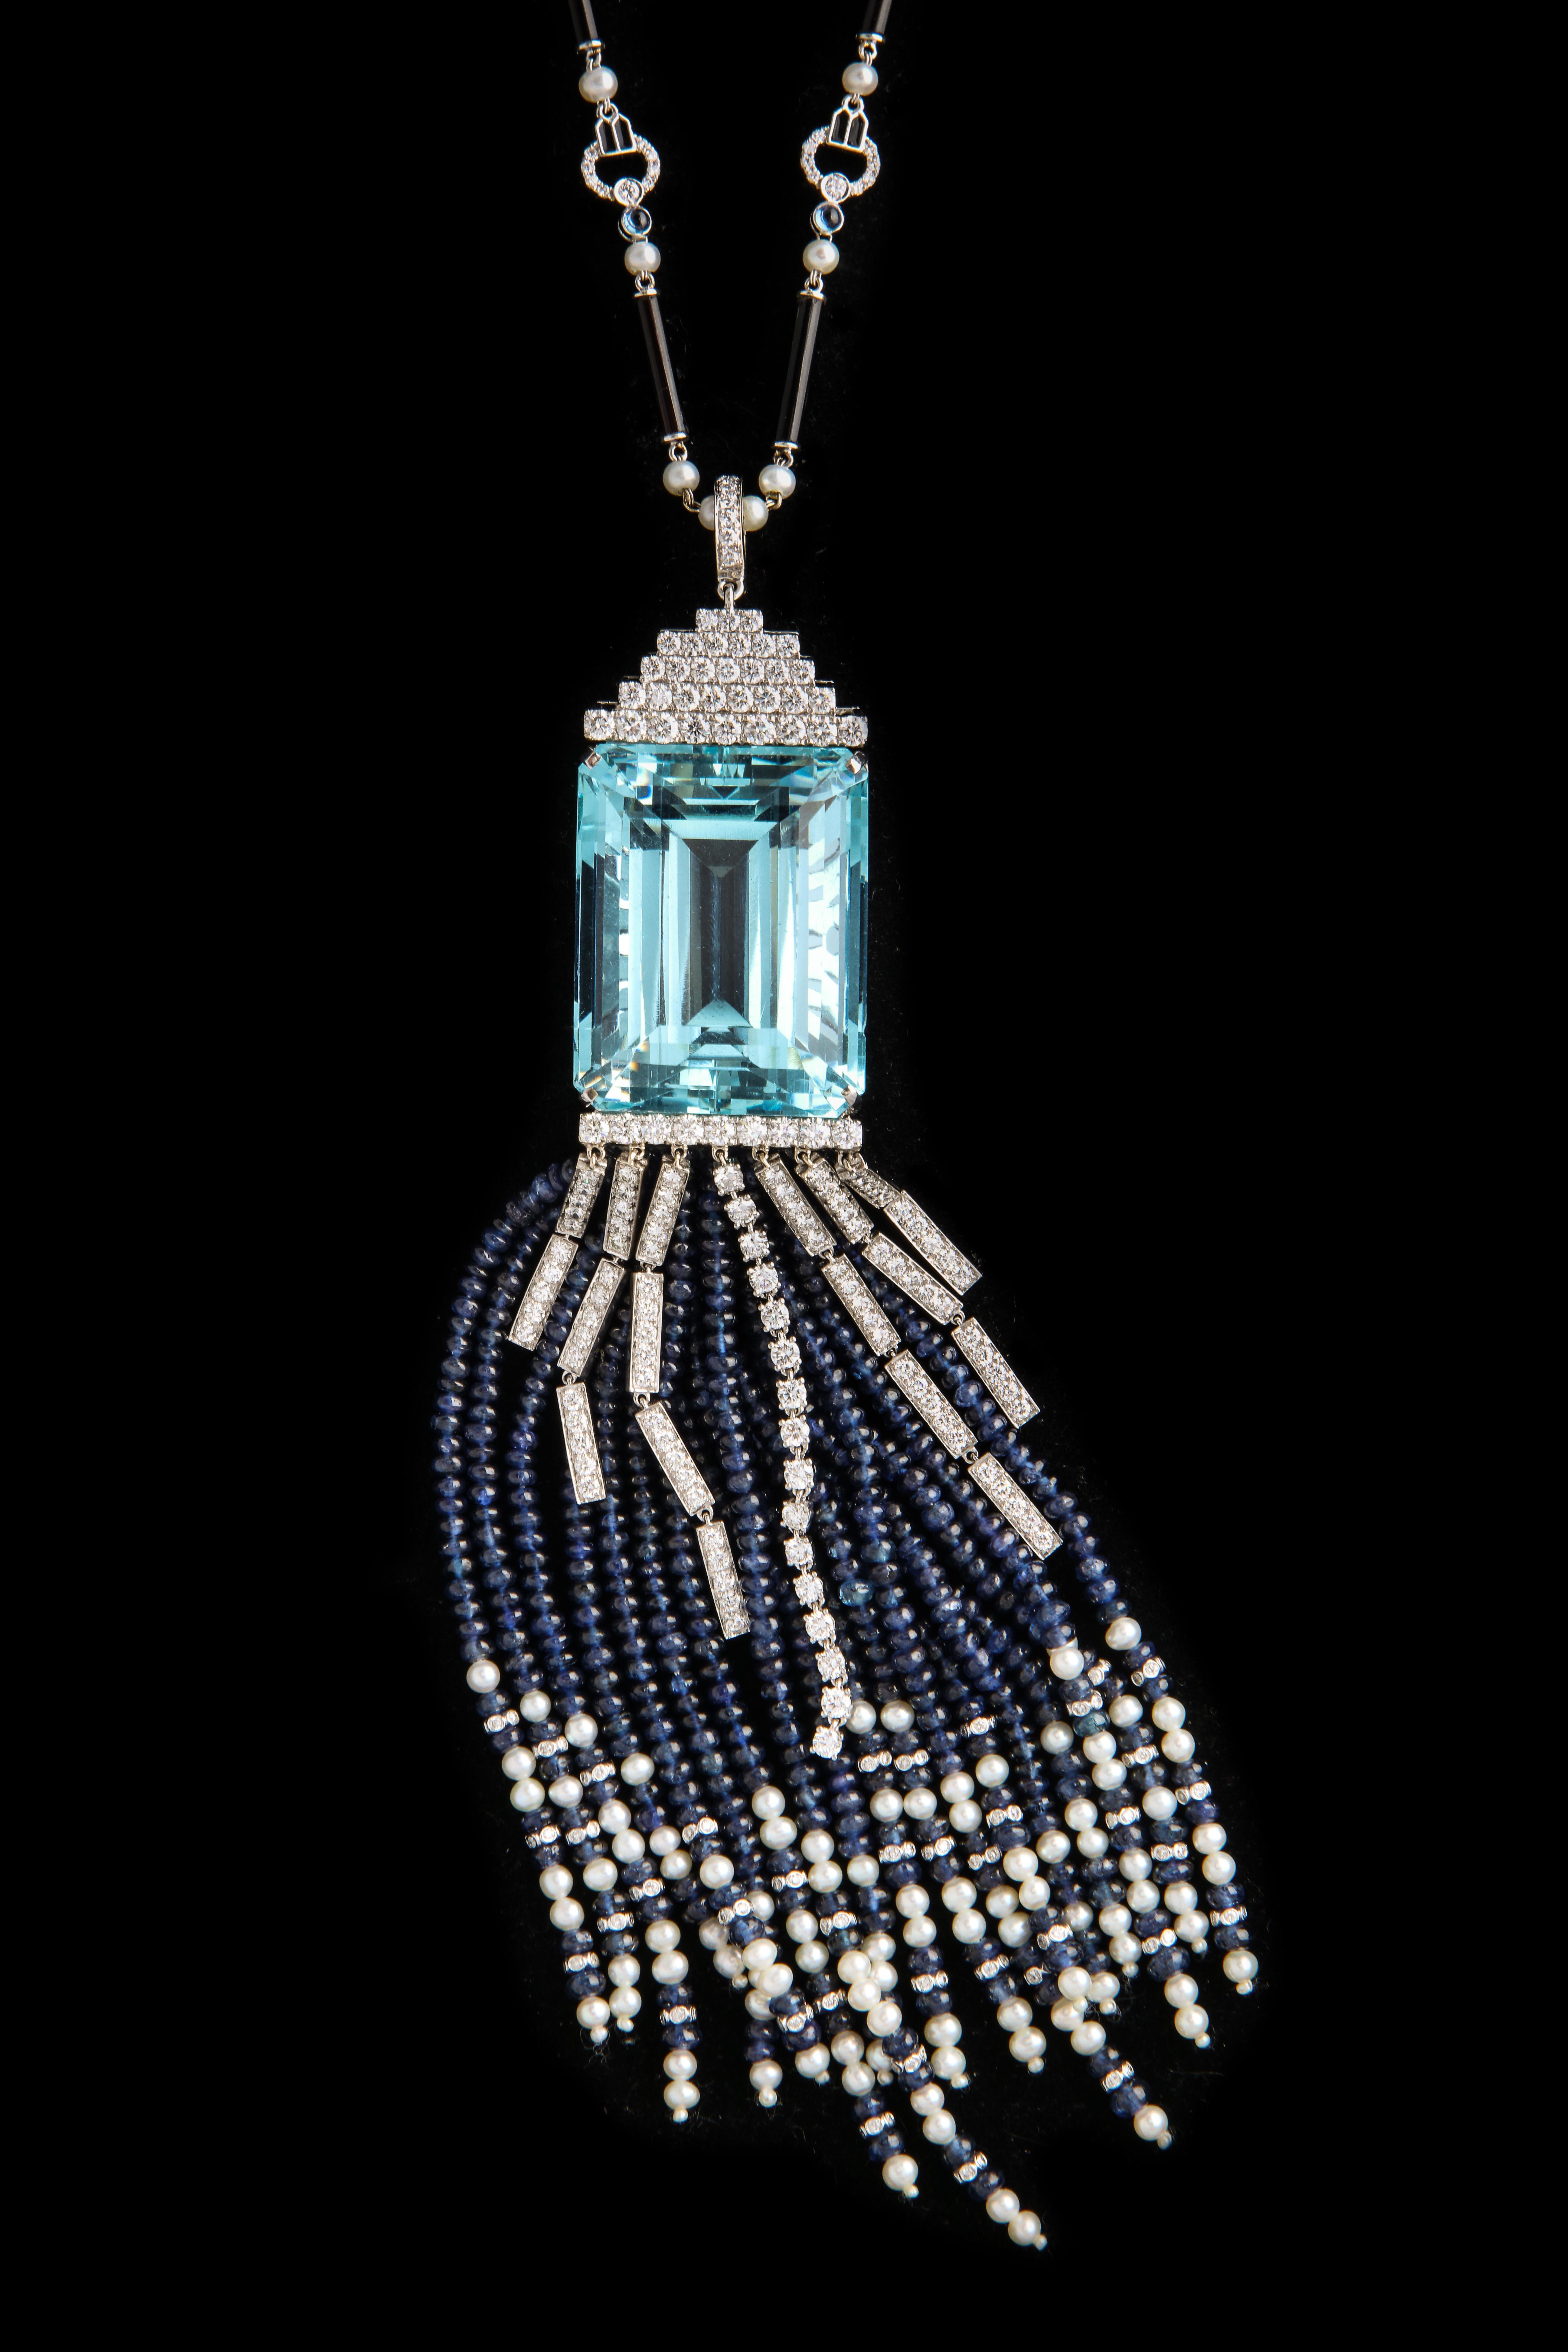 Large Aquamarine and Sapphire Necklace

9.41 ct of Diamonds , 130.02 ct of Sapphires, and a single 118 ct Aquamarine!